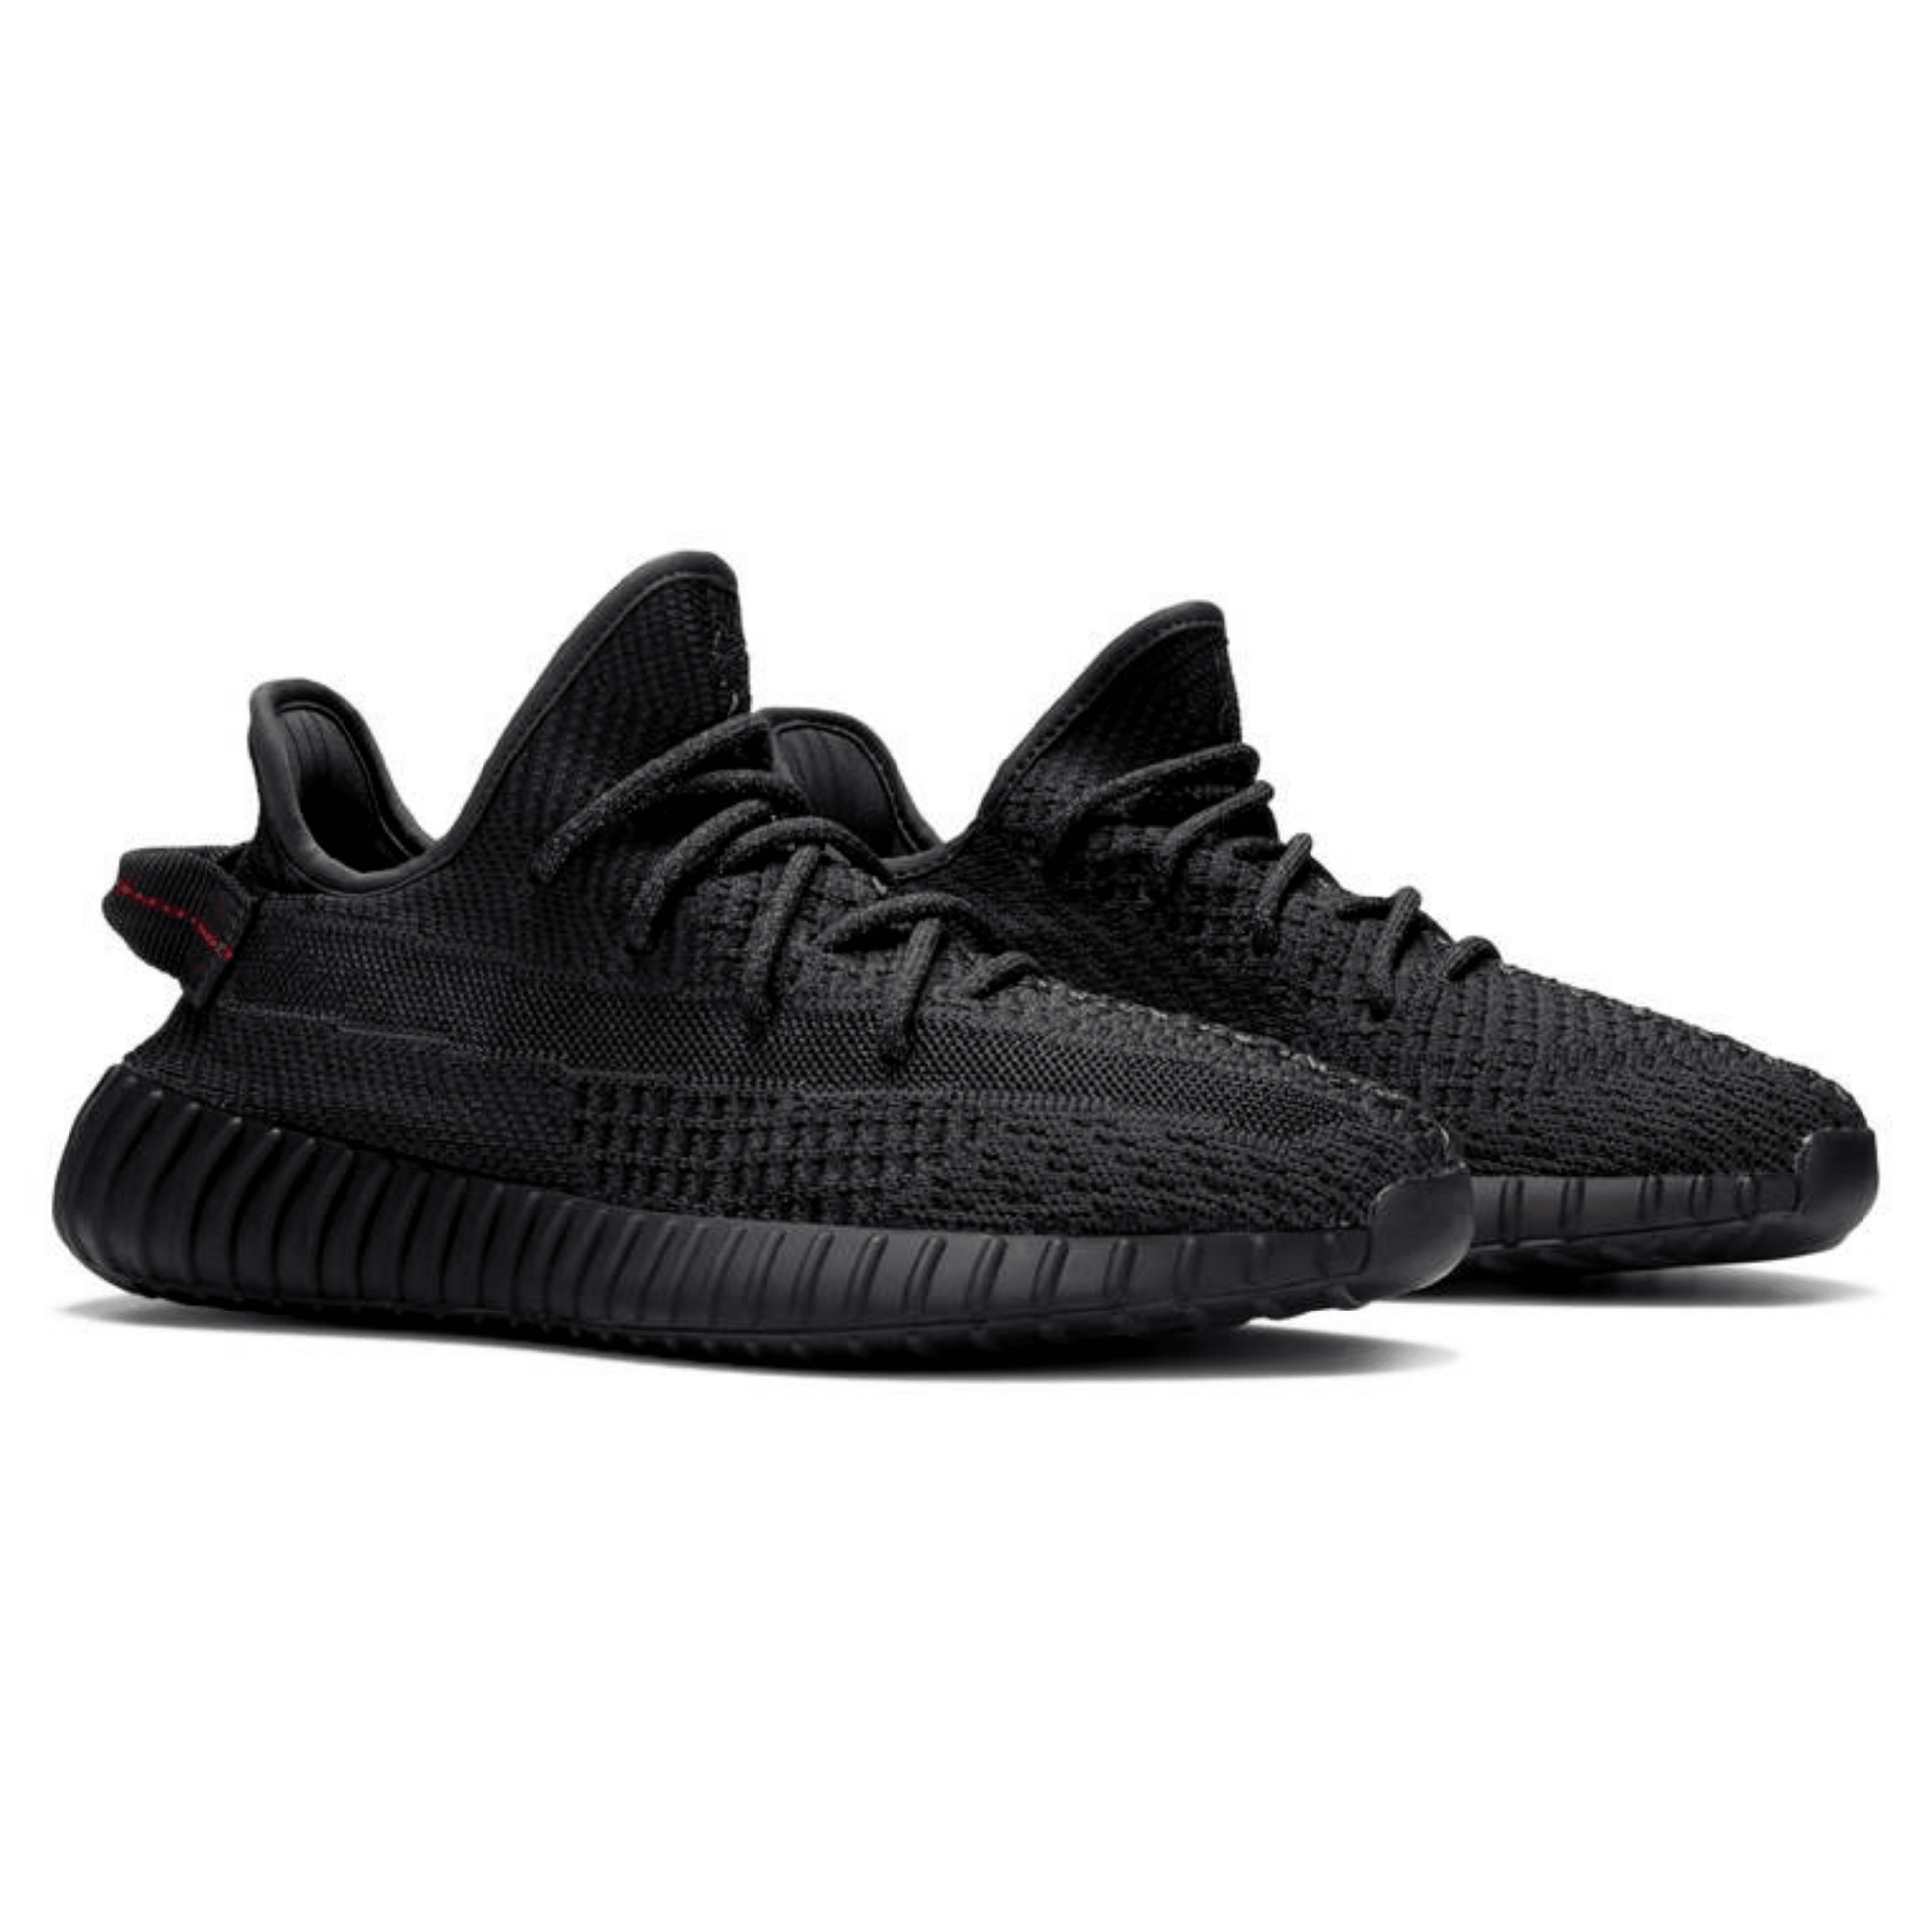 Yeezy Boost 350 V2 'Static Black’ (Reflective) - FRESNEAKERS